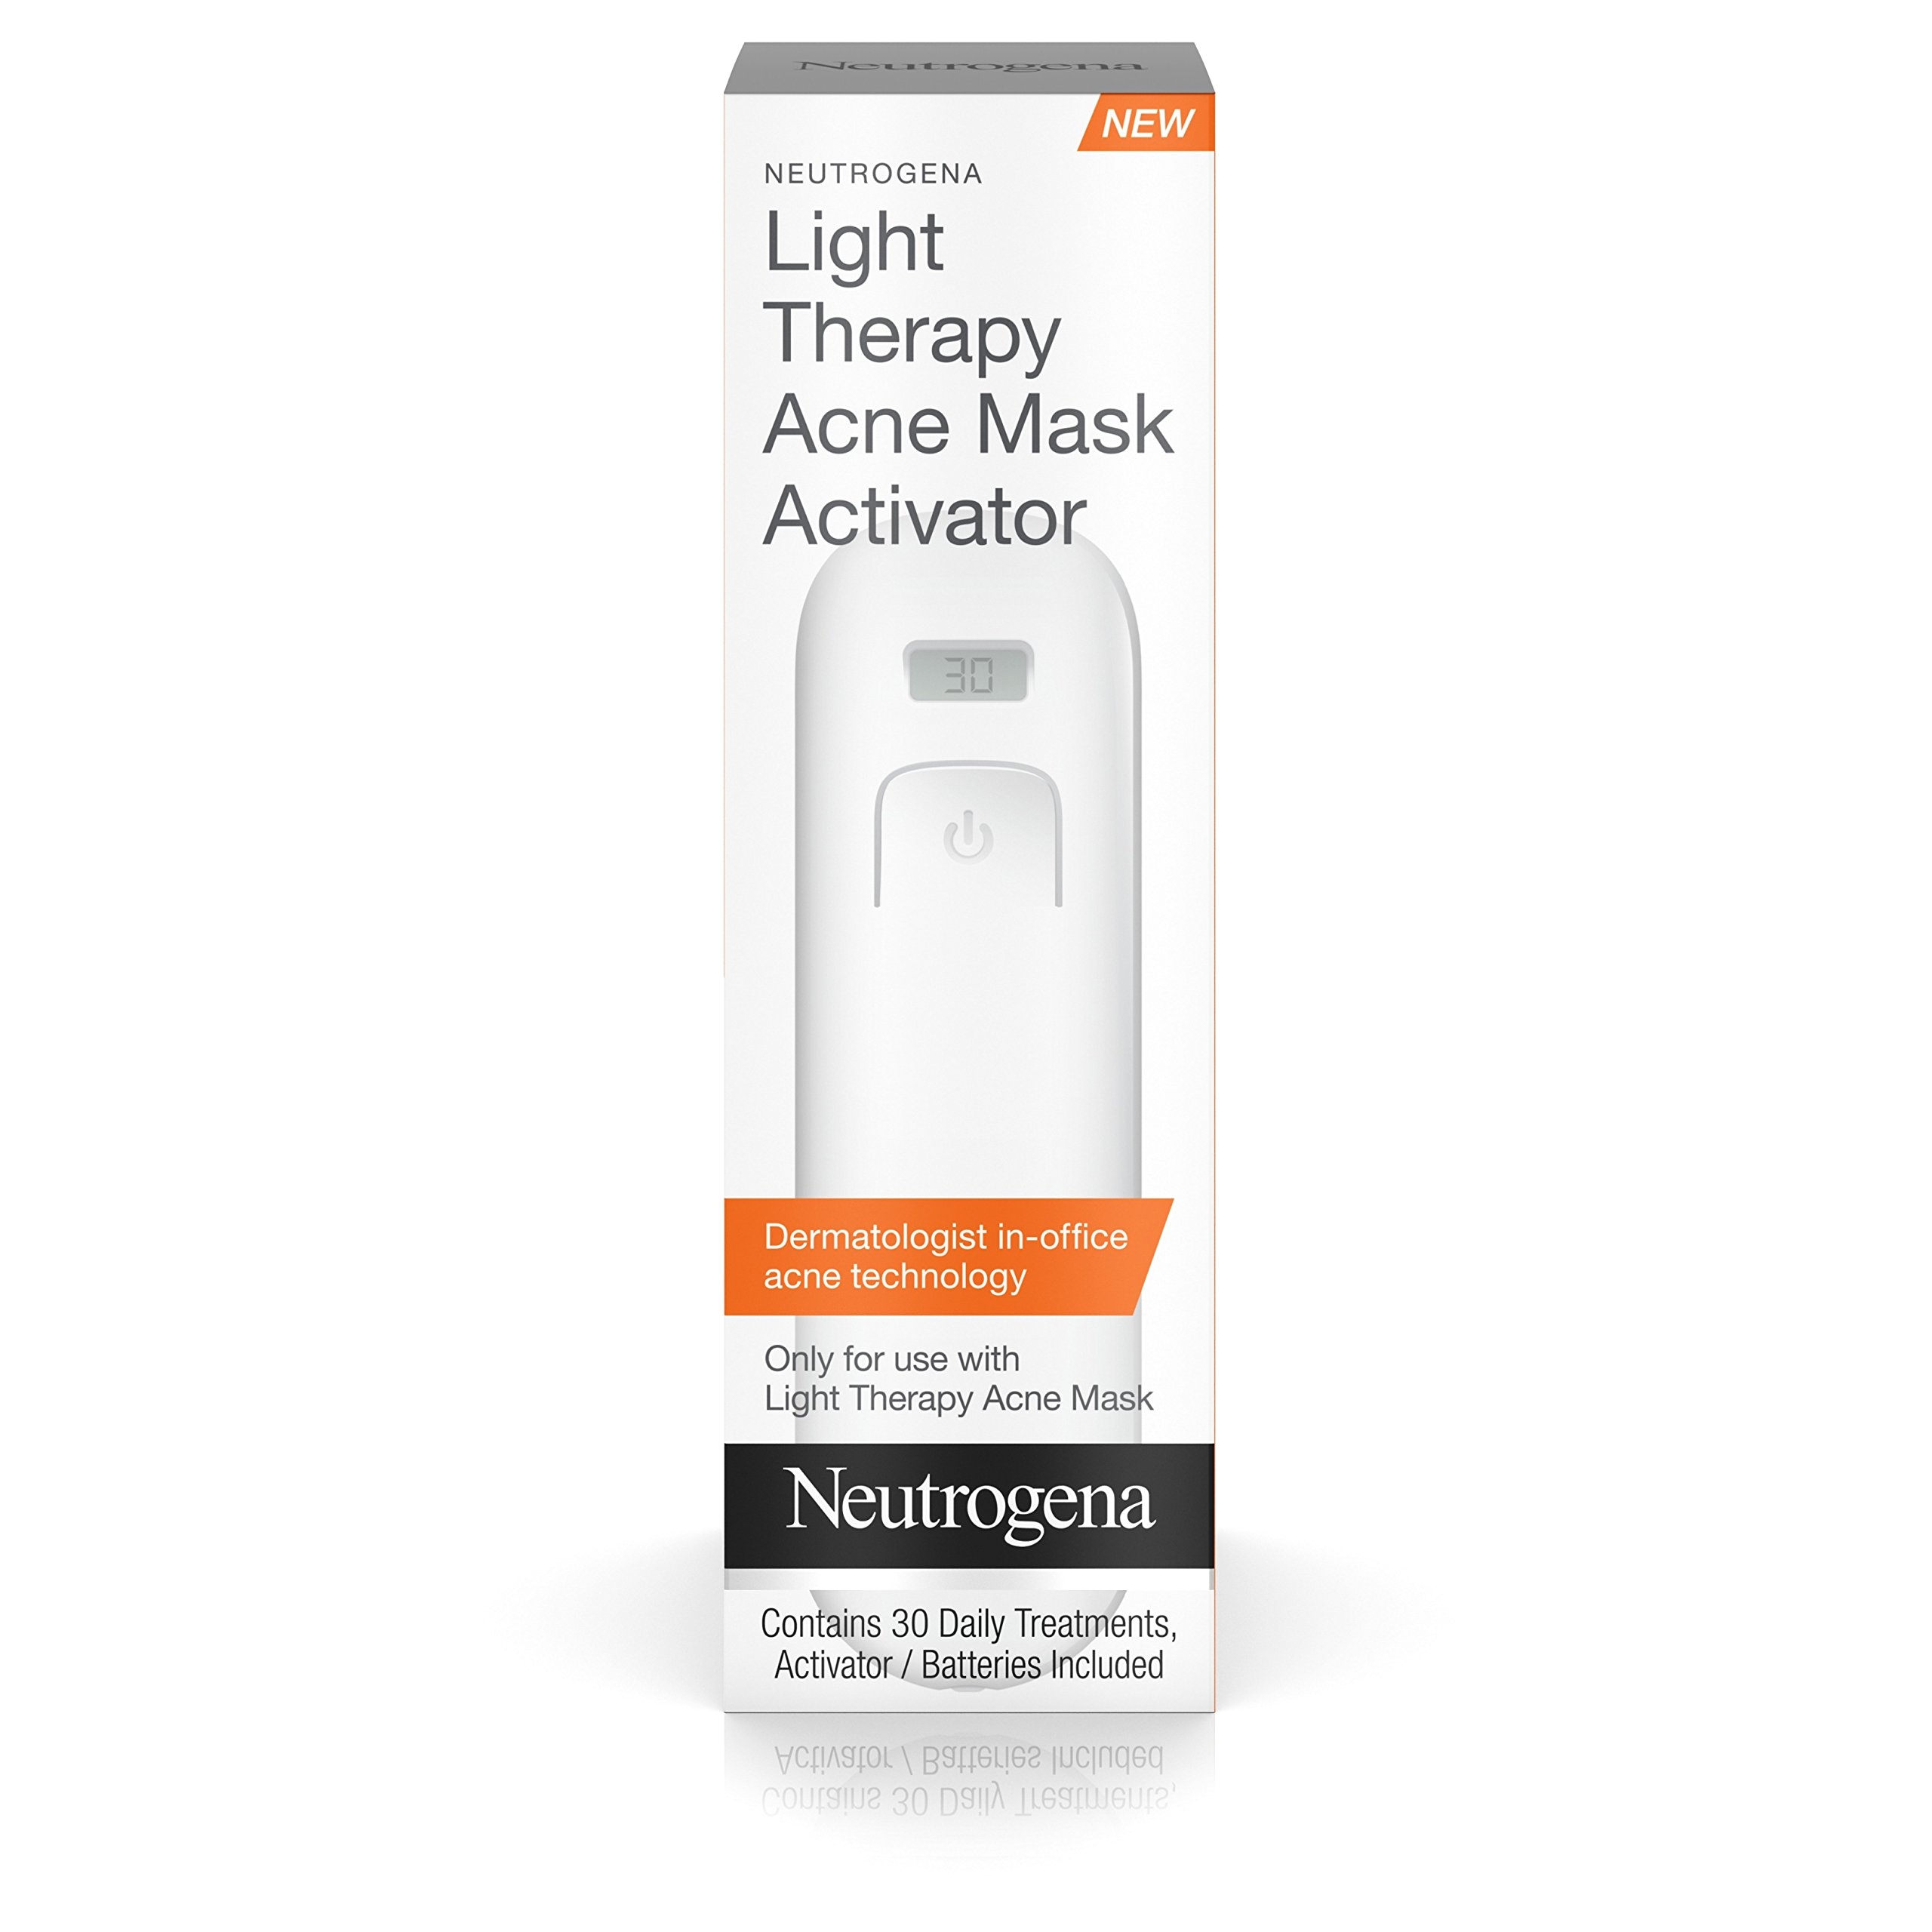 neutrogena acne clearing light therapy acne treatment face mask activator for 30 sessions 1 activator